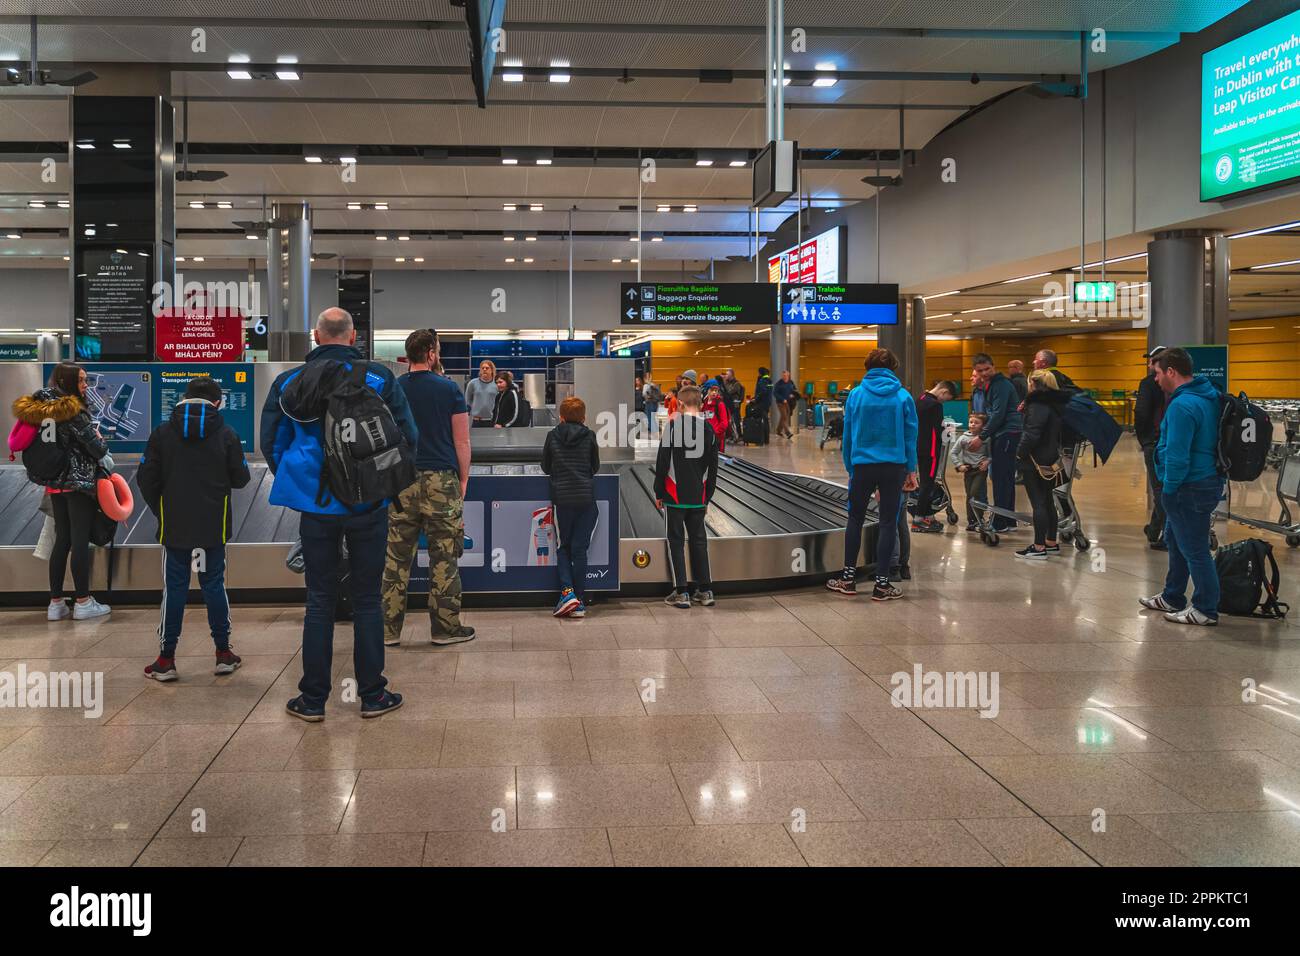 People waiting at belt conveyor to collect luggage after arrival to Dublin airport Stock Photo